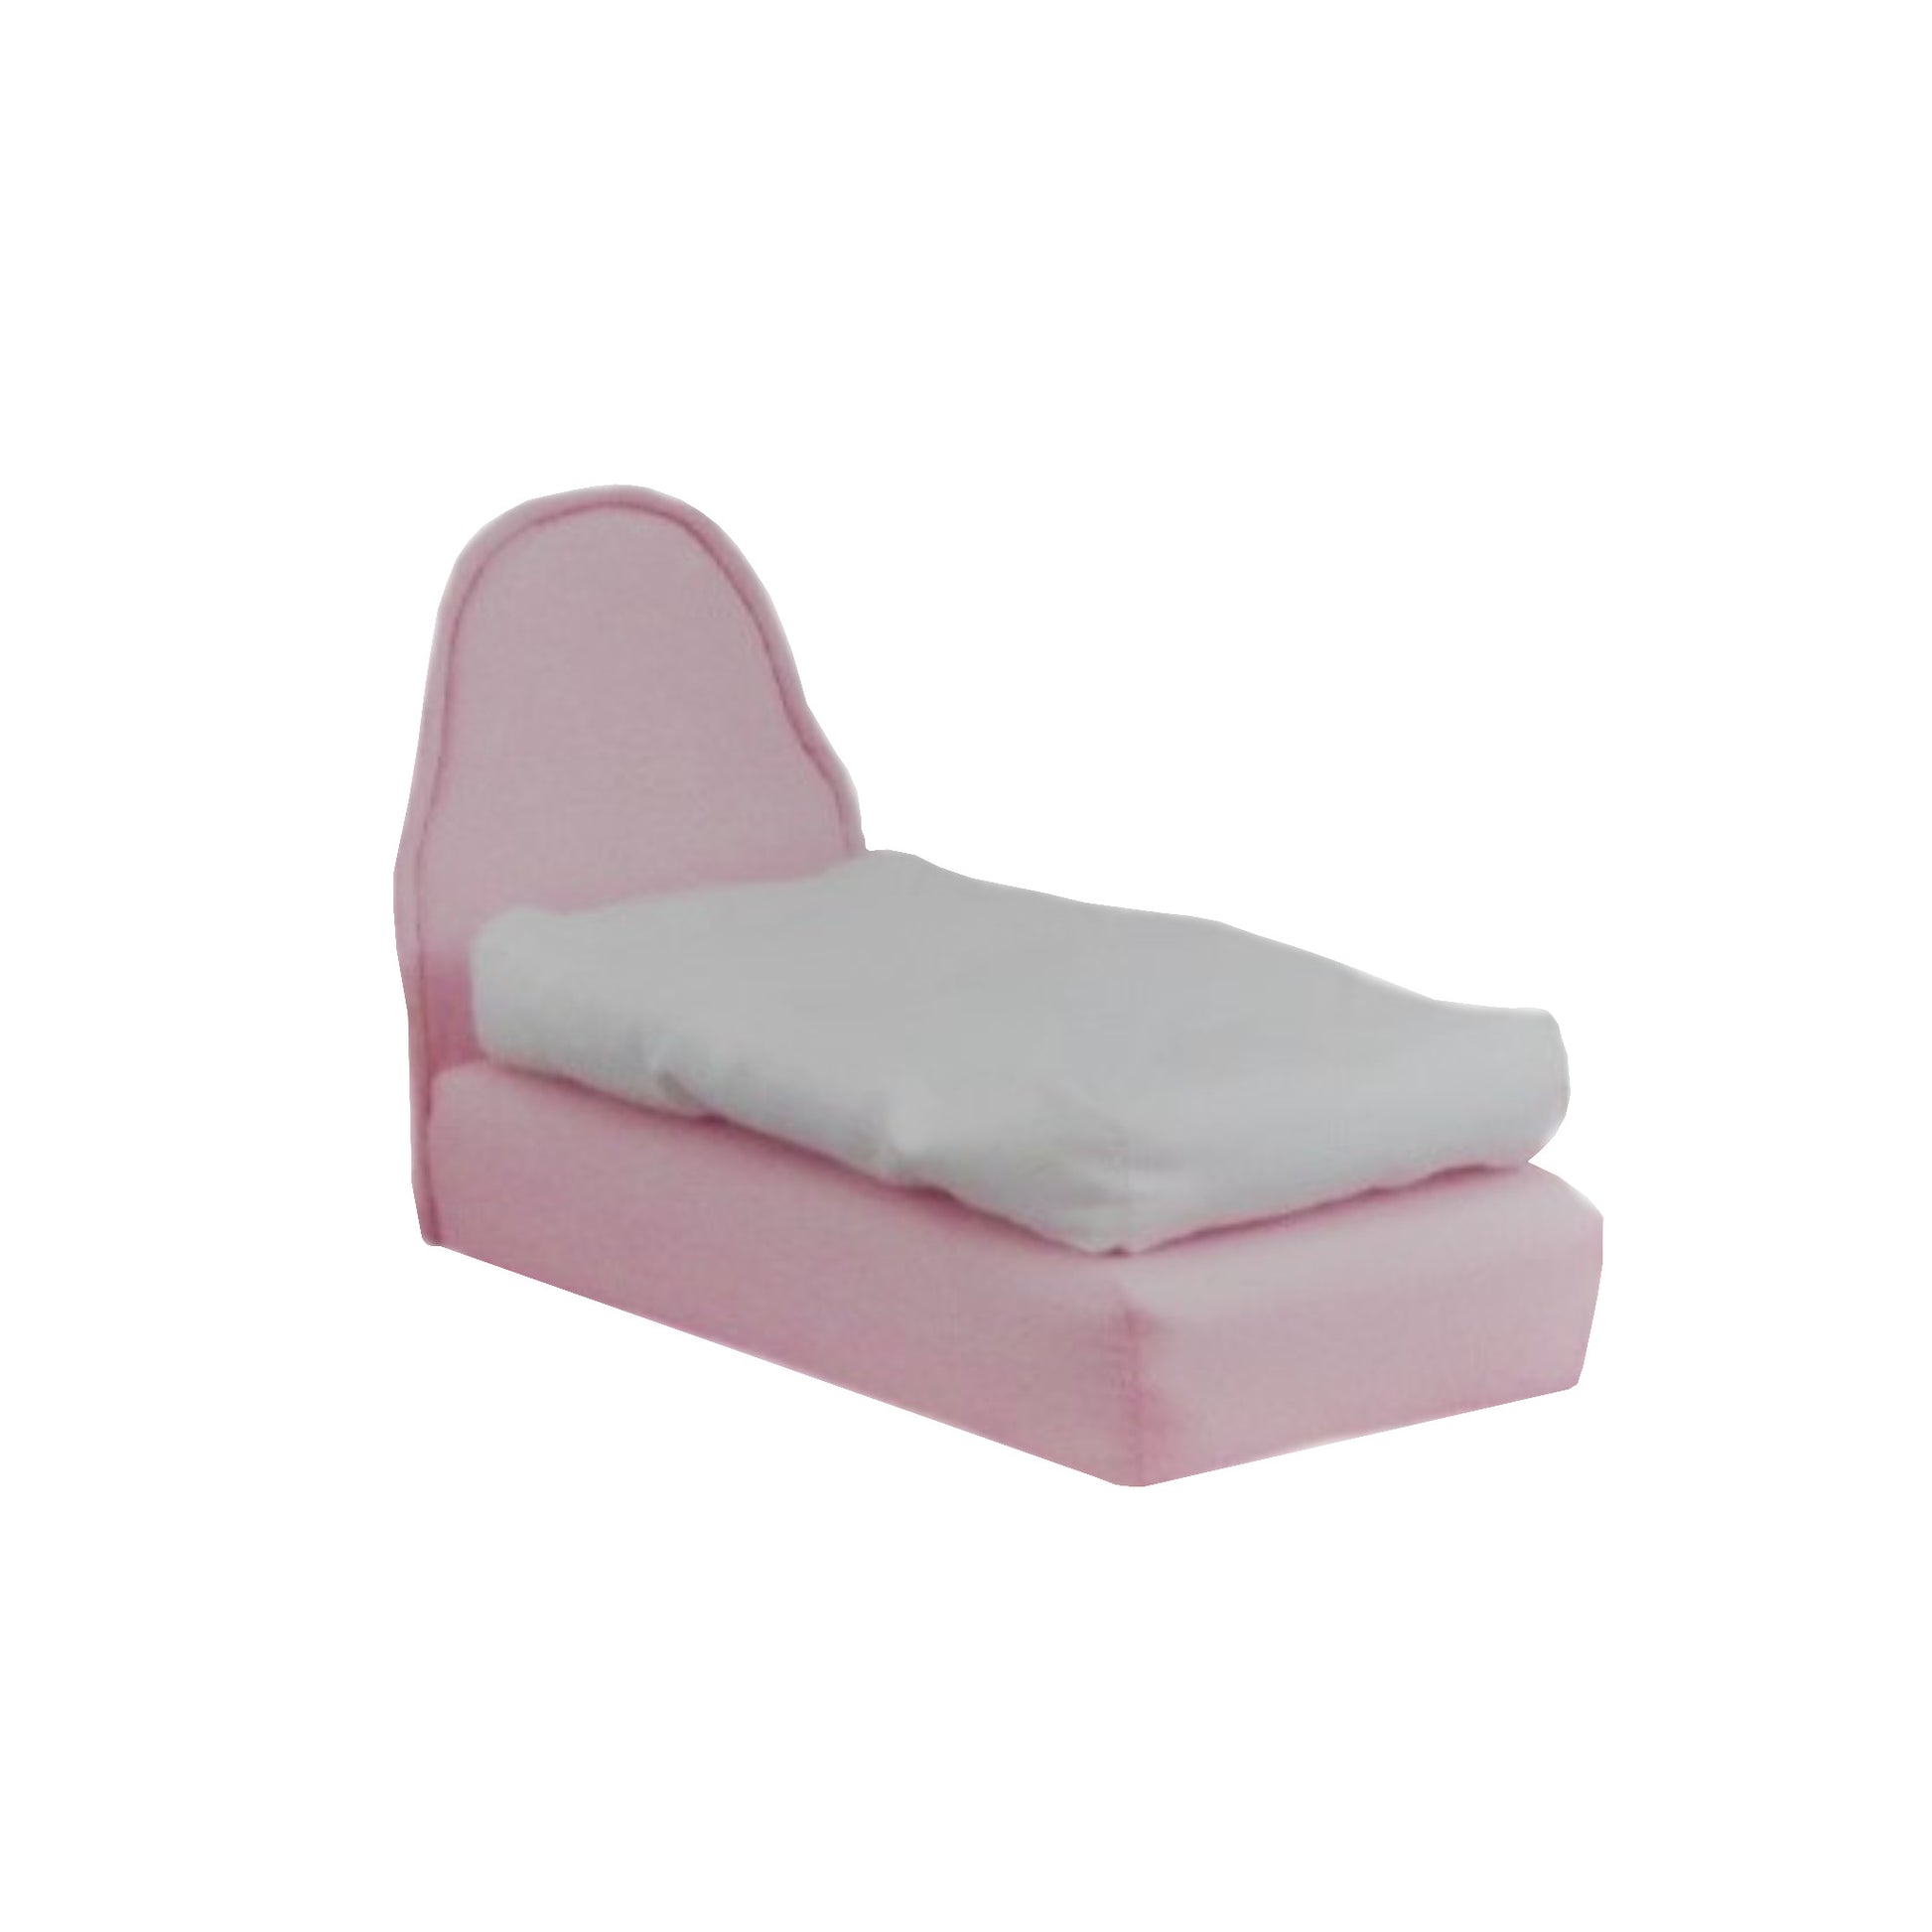 Upholstered Light Pink Doll Bed for 6.5-inch dolls